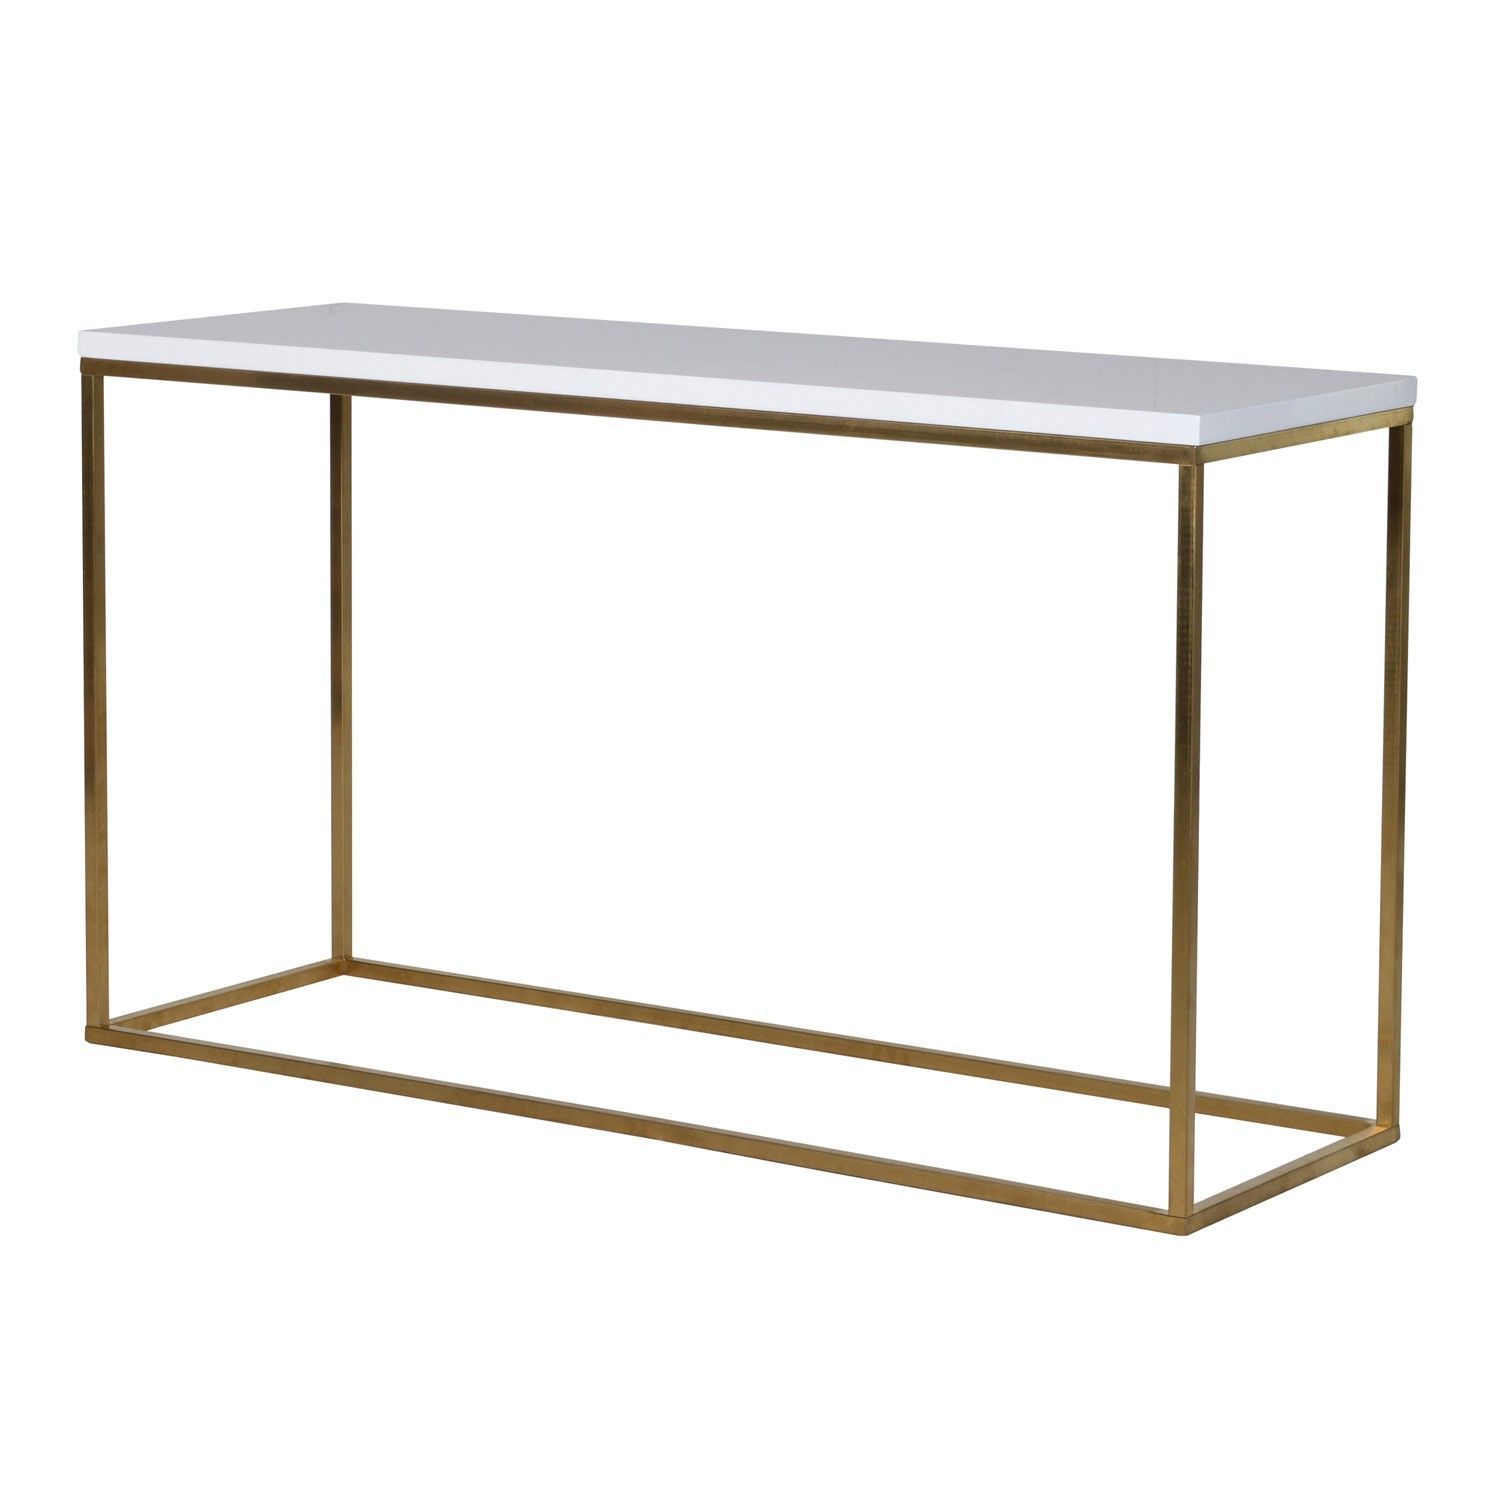 Glossy White Console Table | Sweetpea & Willow In White Gloss And Maple Cream Console Tables (View 14 of 20)